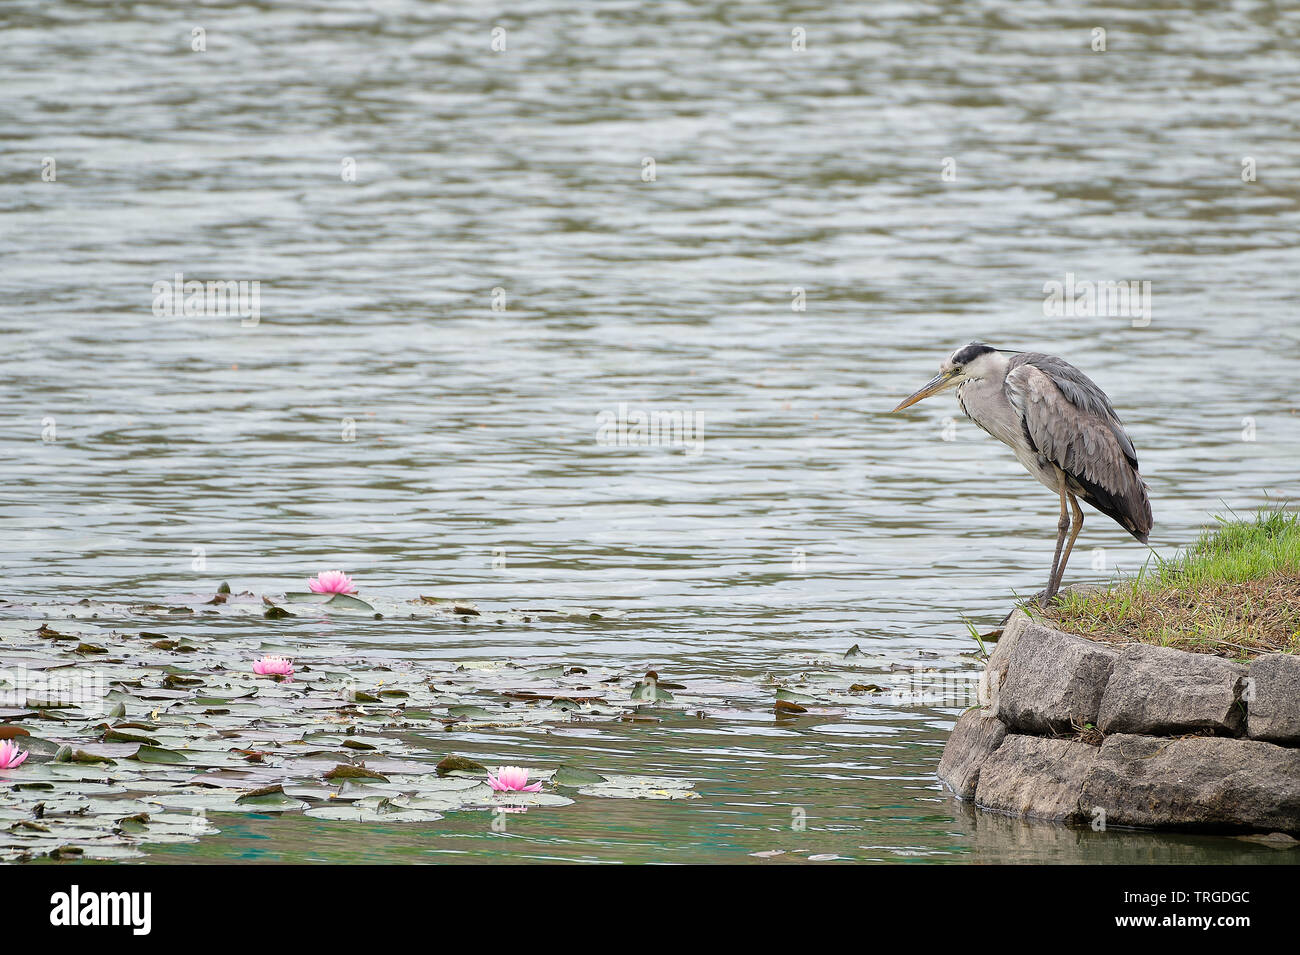 The heron is looking down and it seems a bit angry Stock Photo